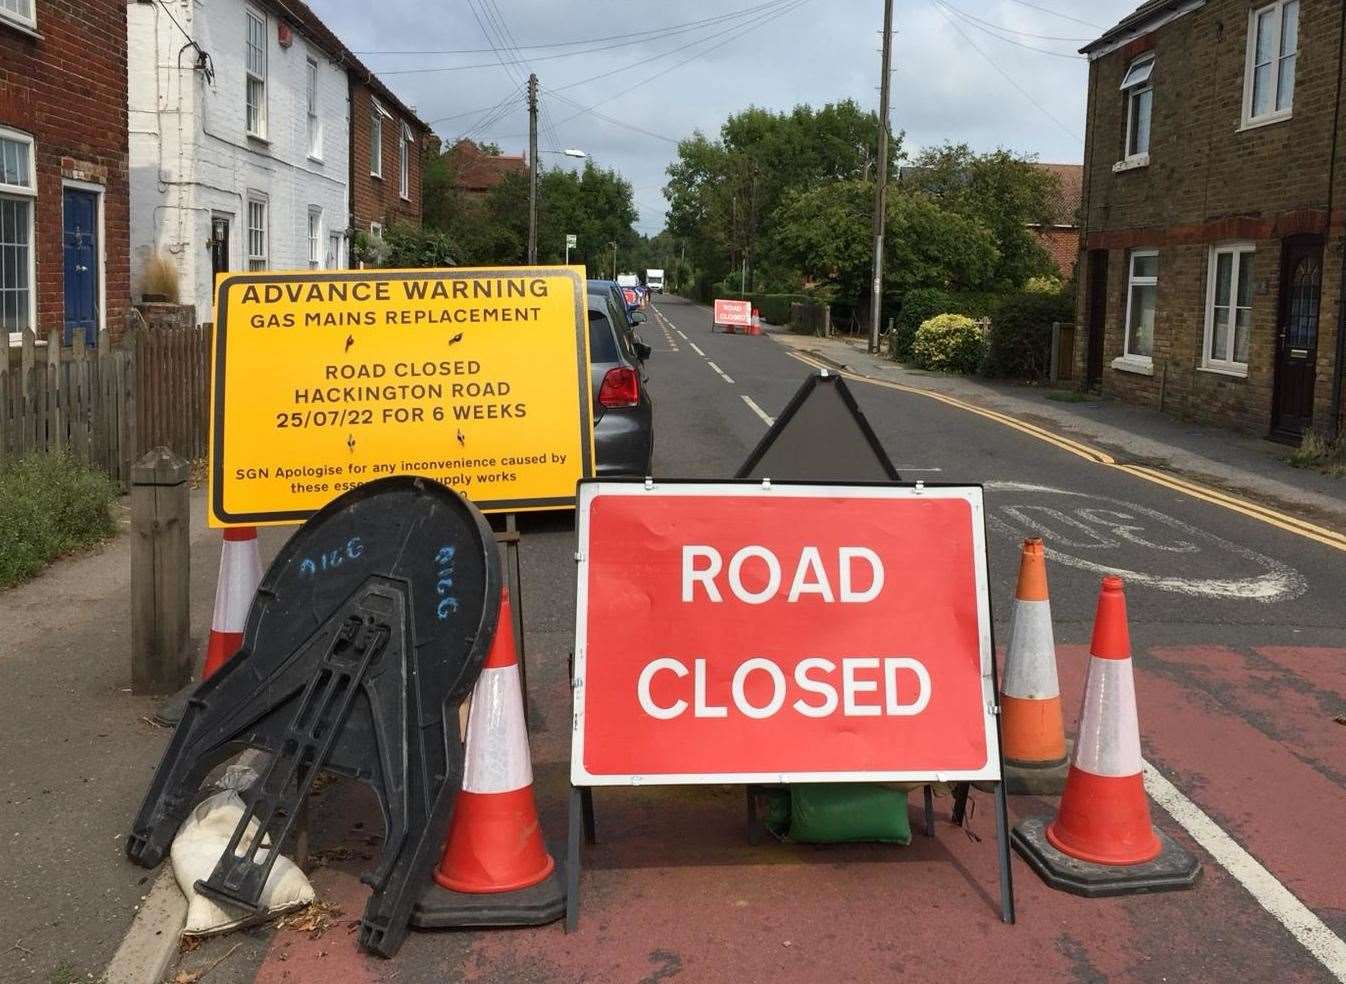 Hackington Road is set to be closed until September 5